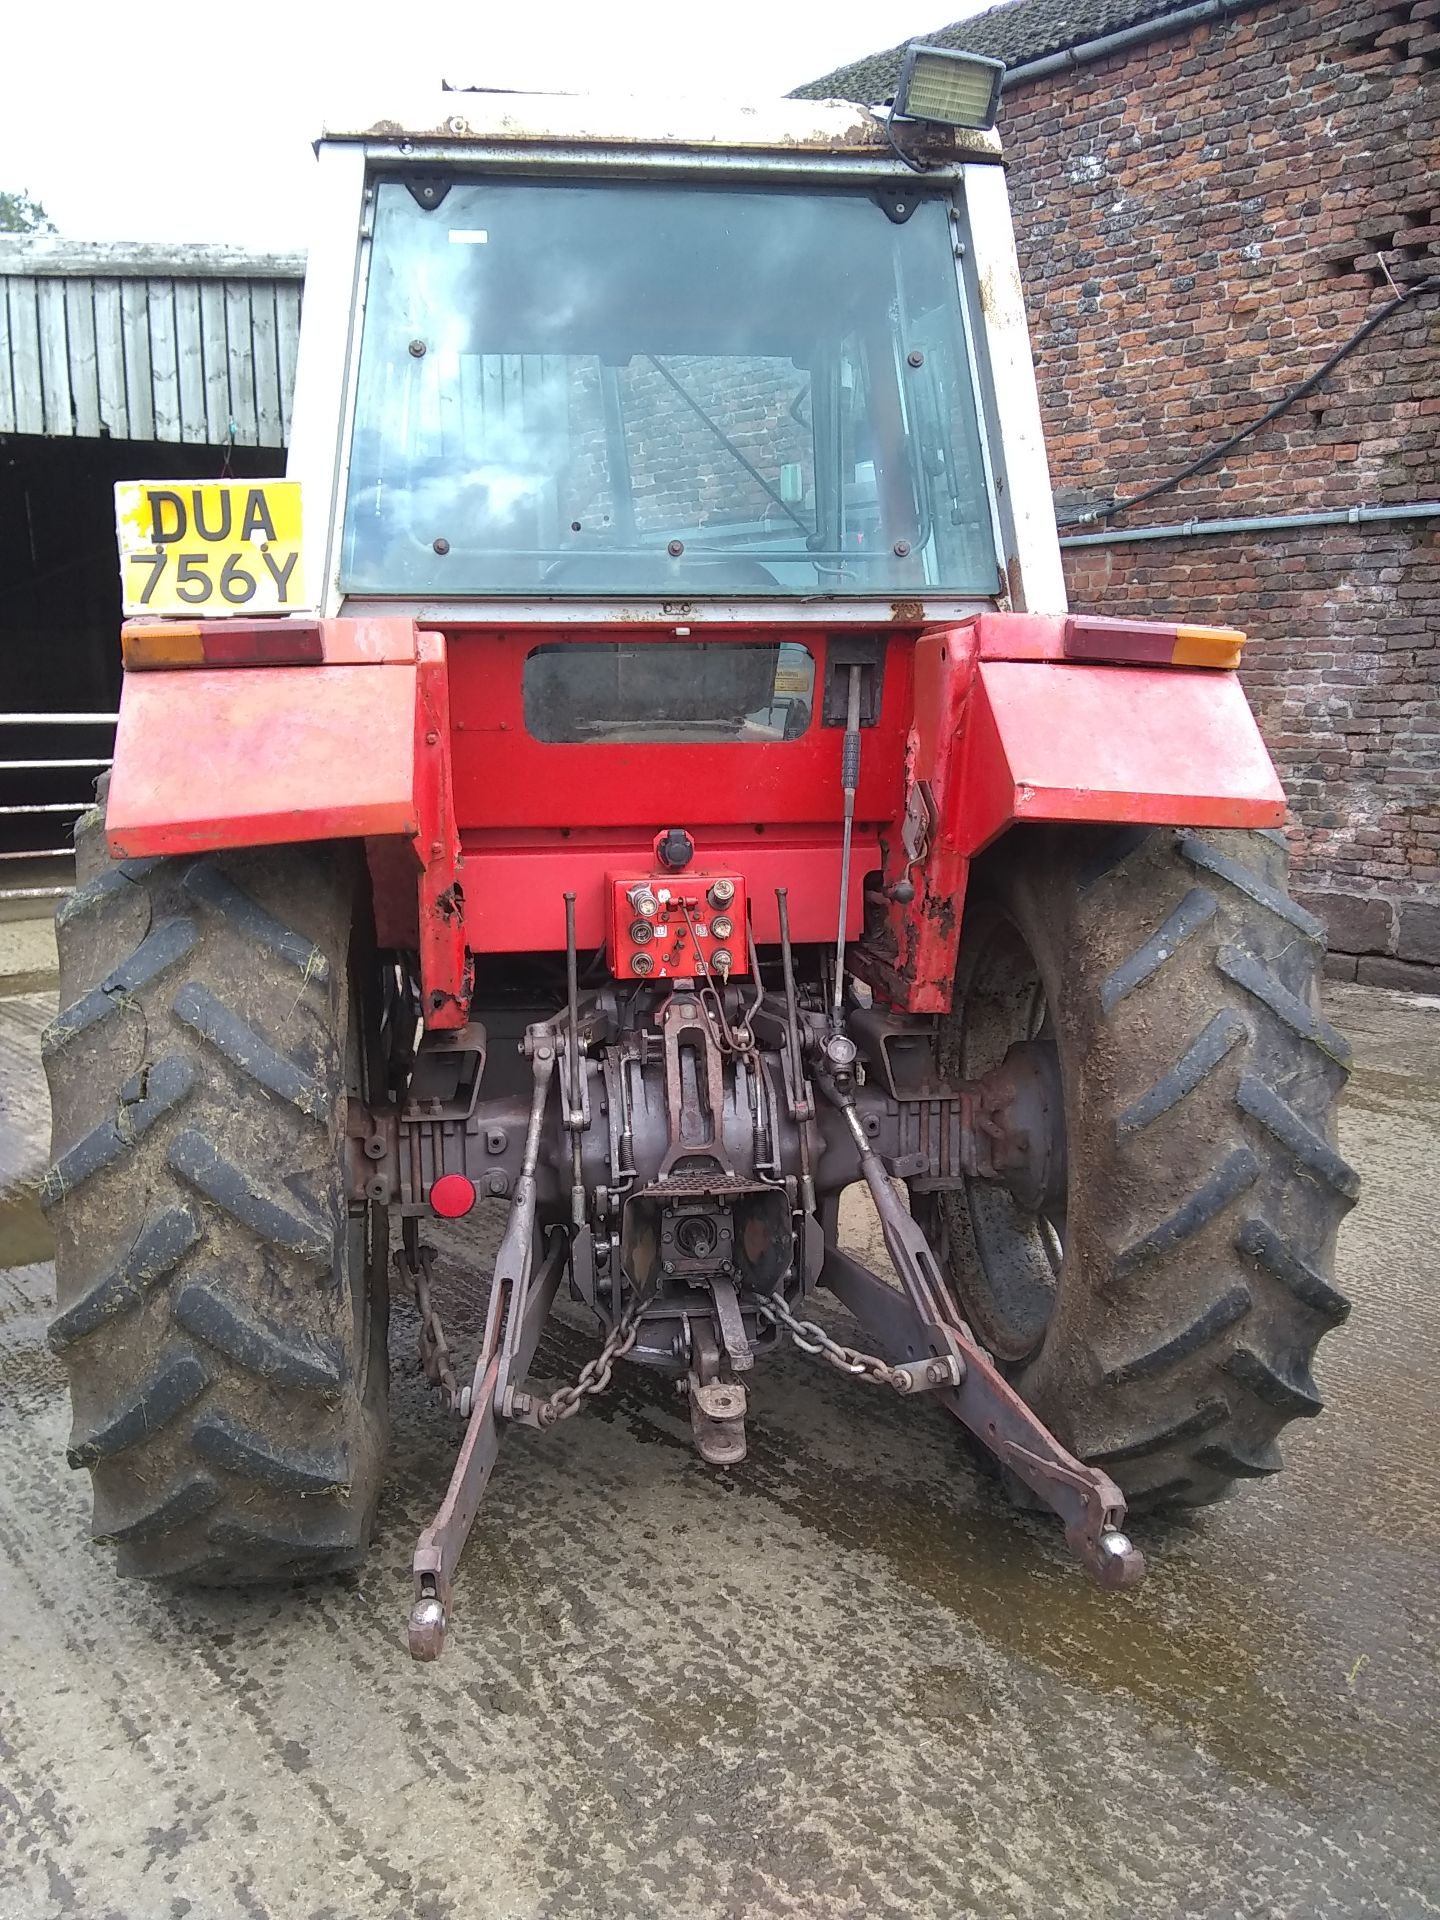 1983 Massey Ferguson 690 with loader, fork, bucket and spare front wheels - Image 4 of 6